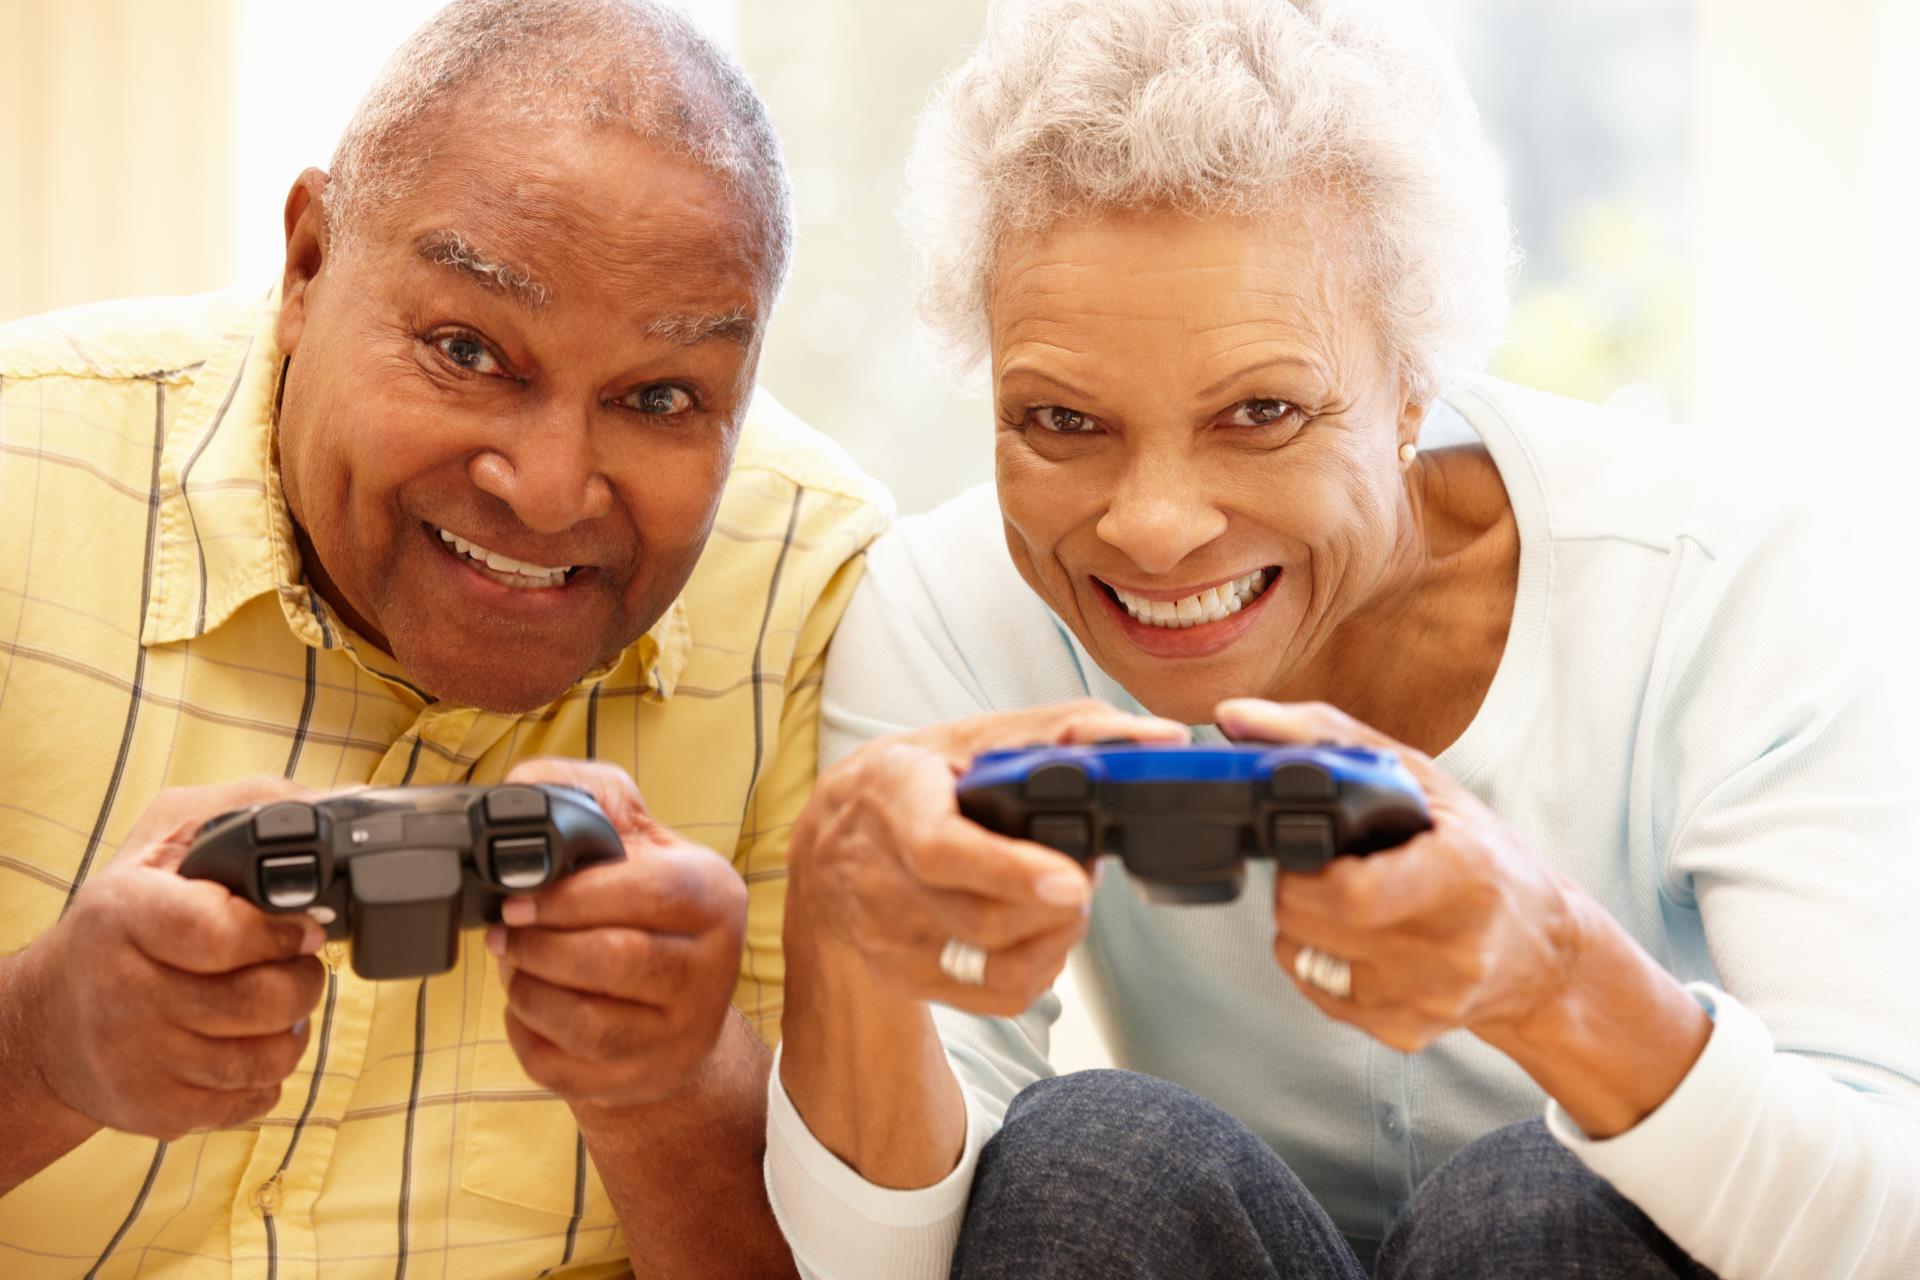 Switch it up! Playing Computer Games for the Over 55's